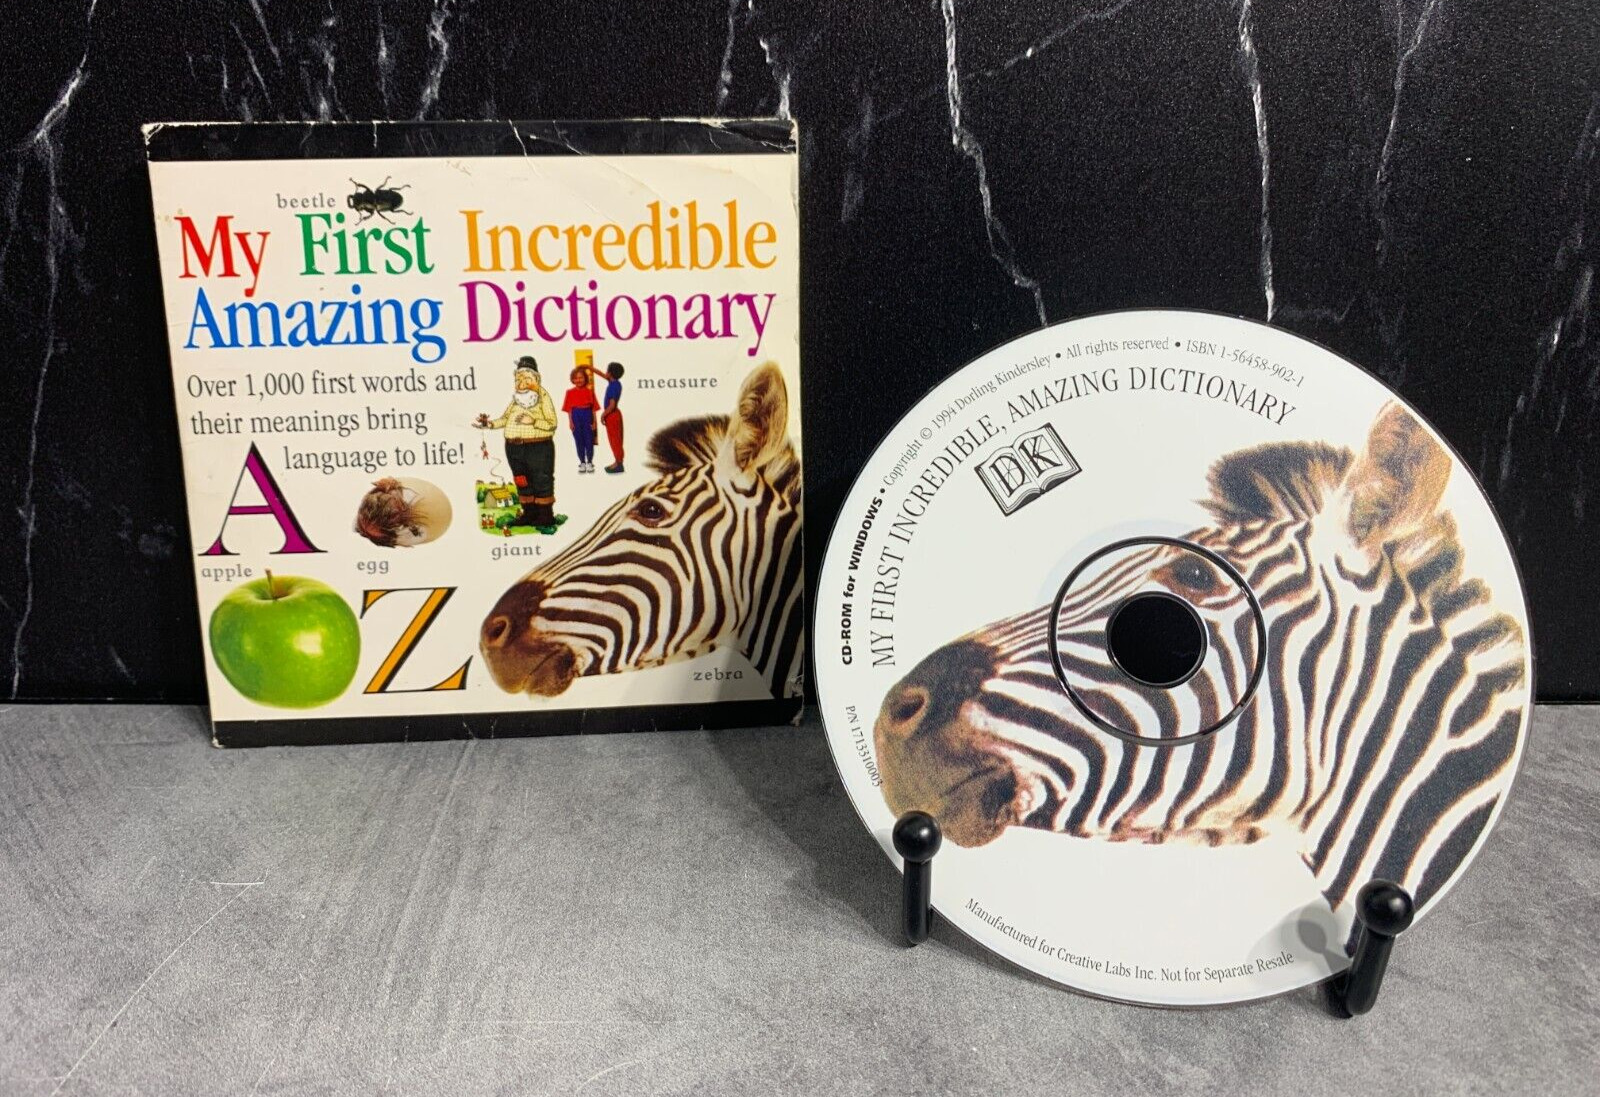 My First Incredible Amazing Dictionary (Vintage PC CD-ROM, 1994)